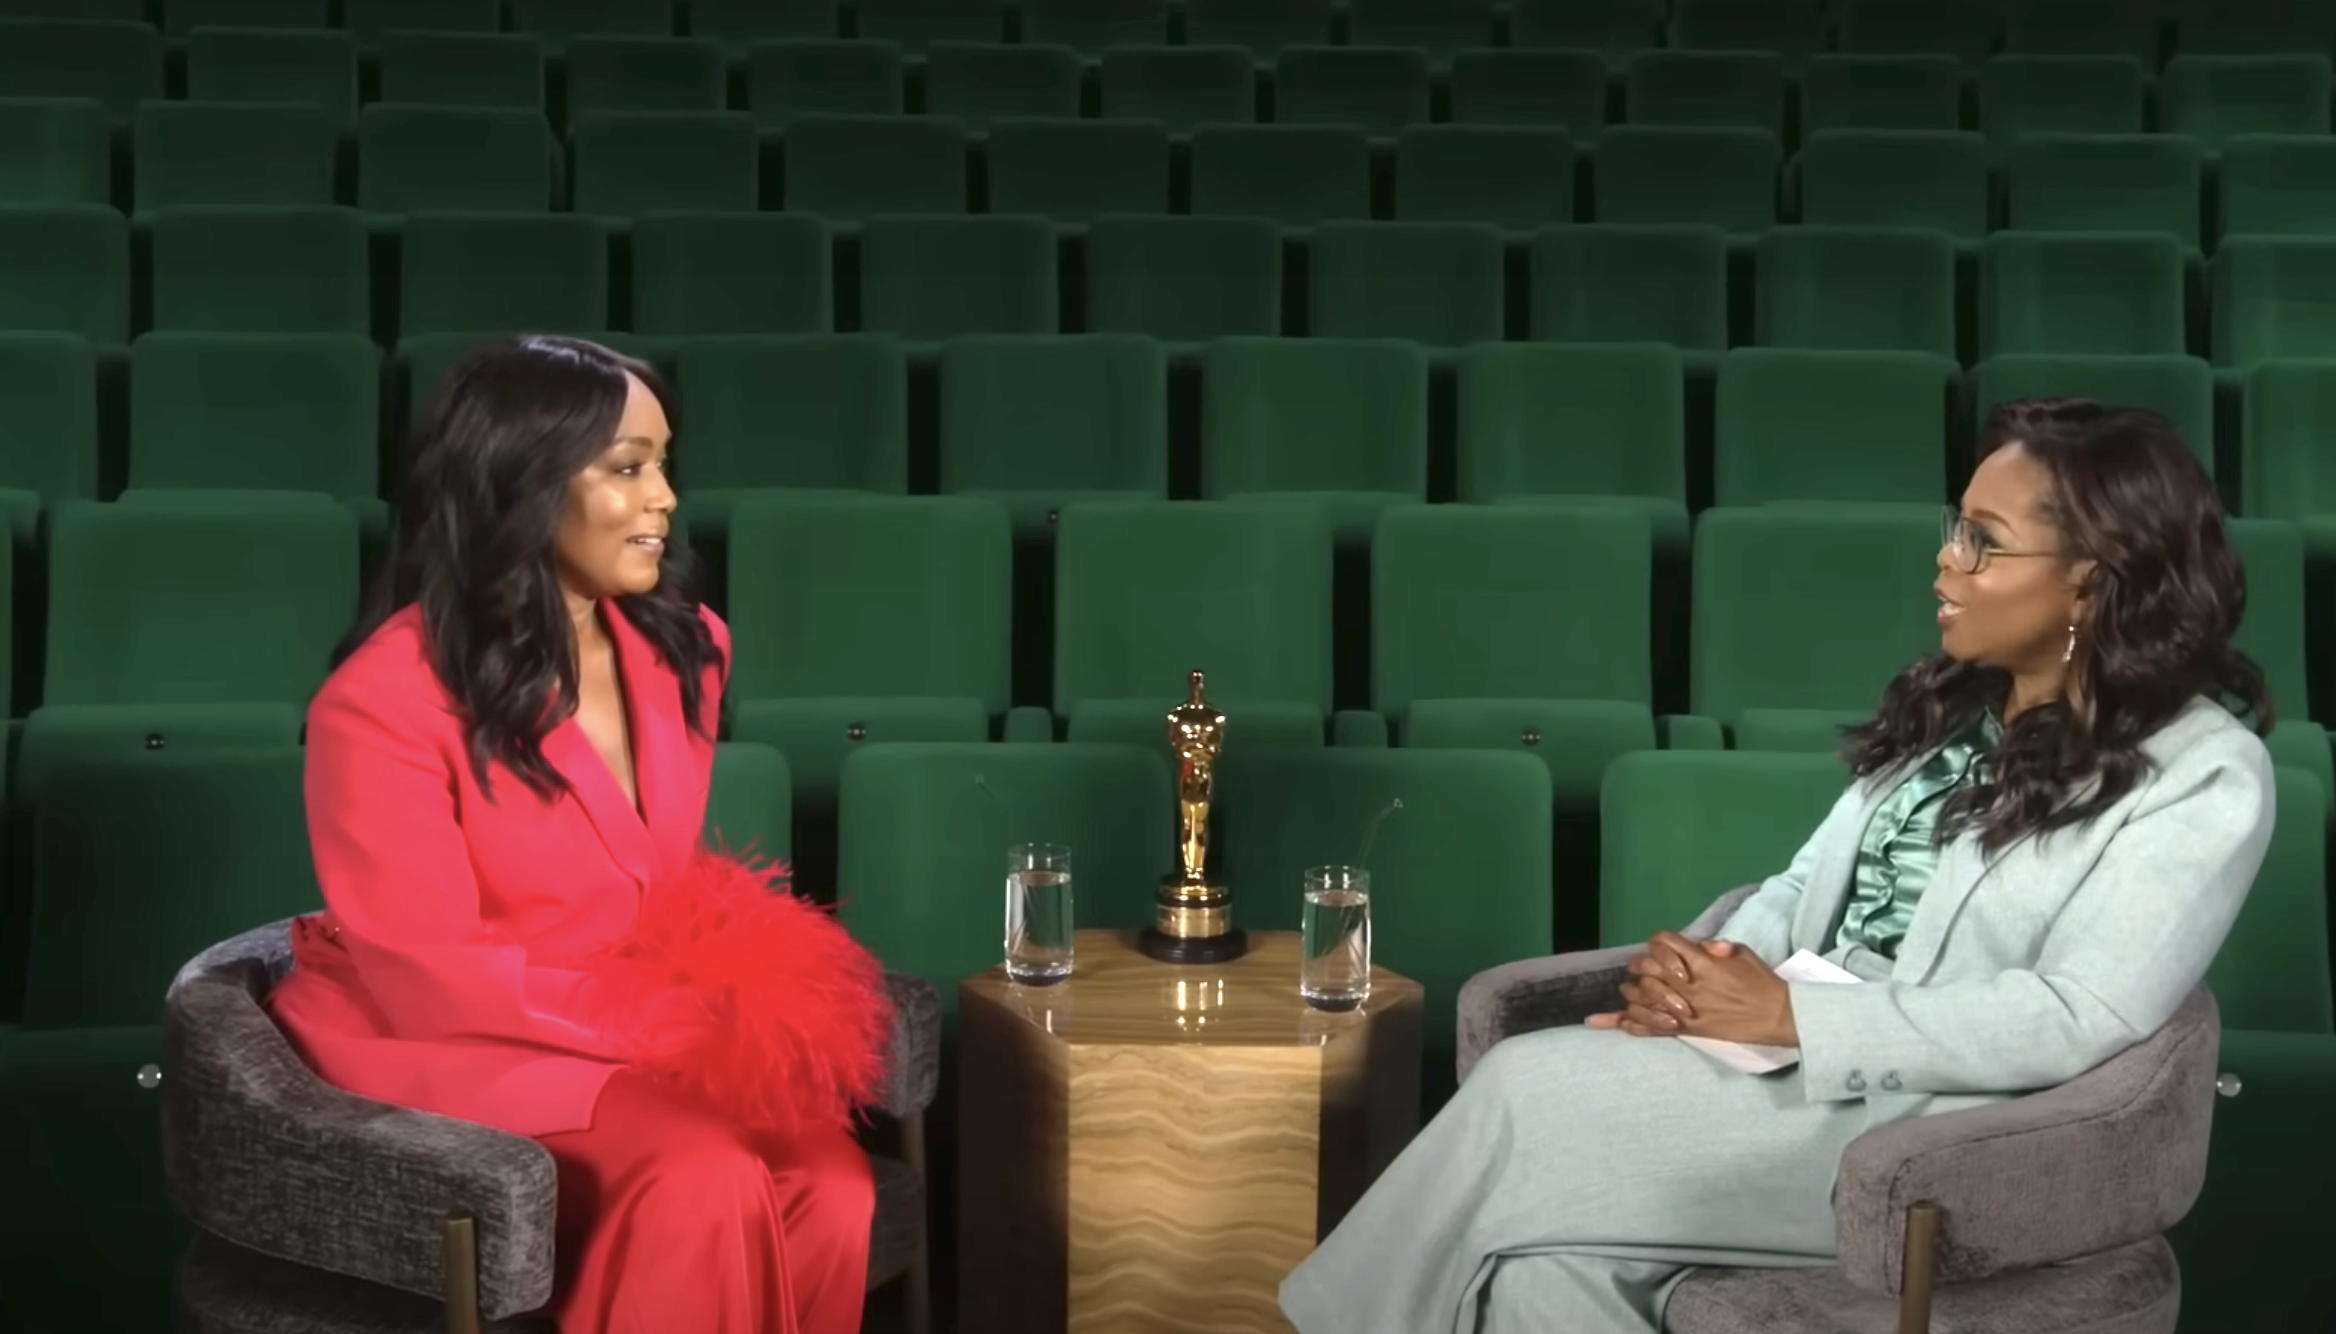 Angela and Oprah in conversation with an Oscar trophy on a table in between them